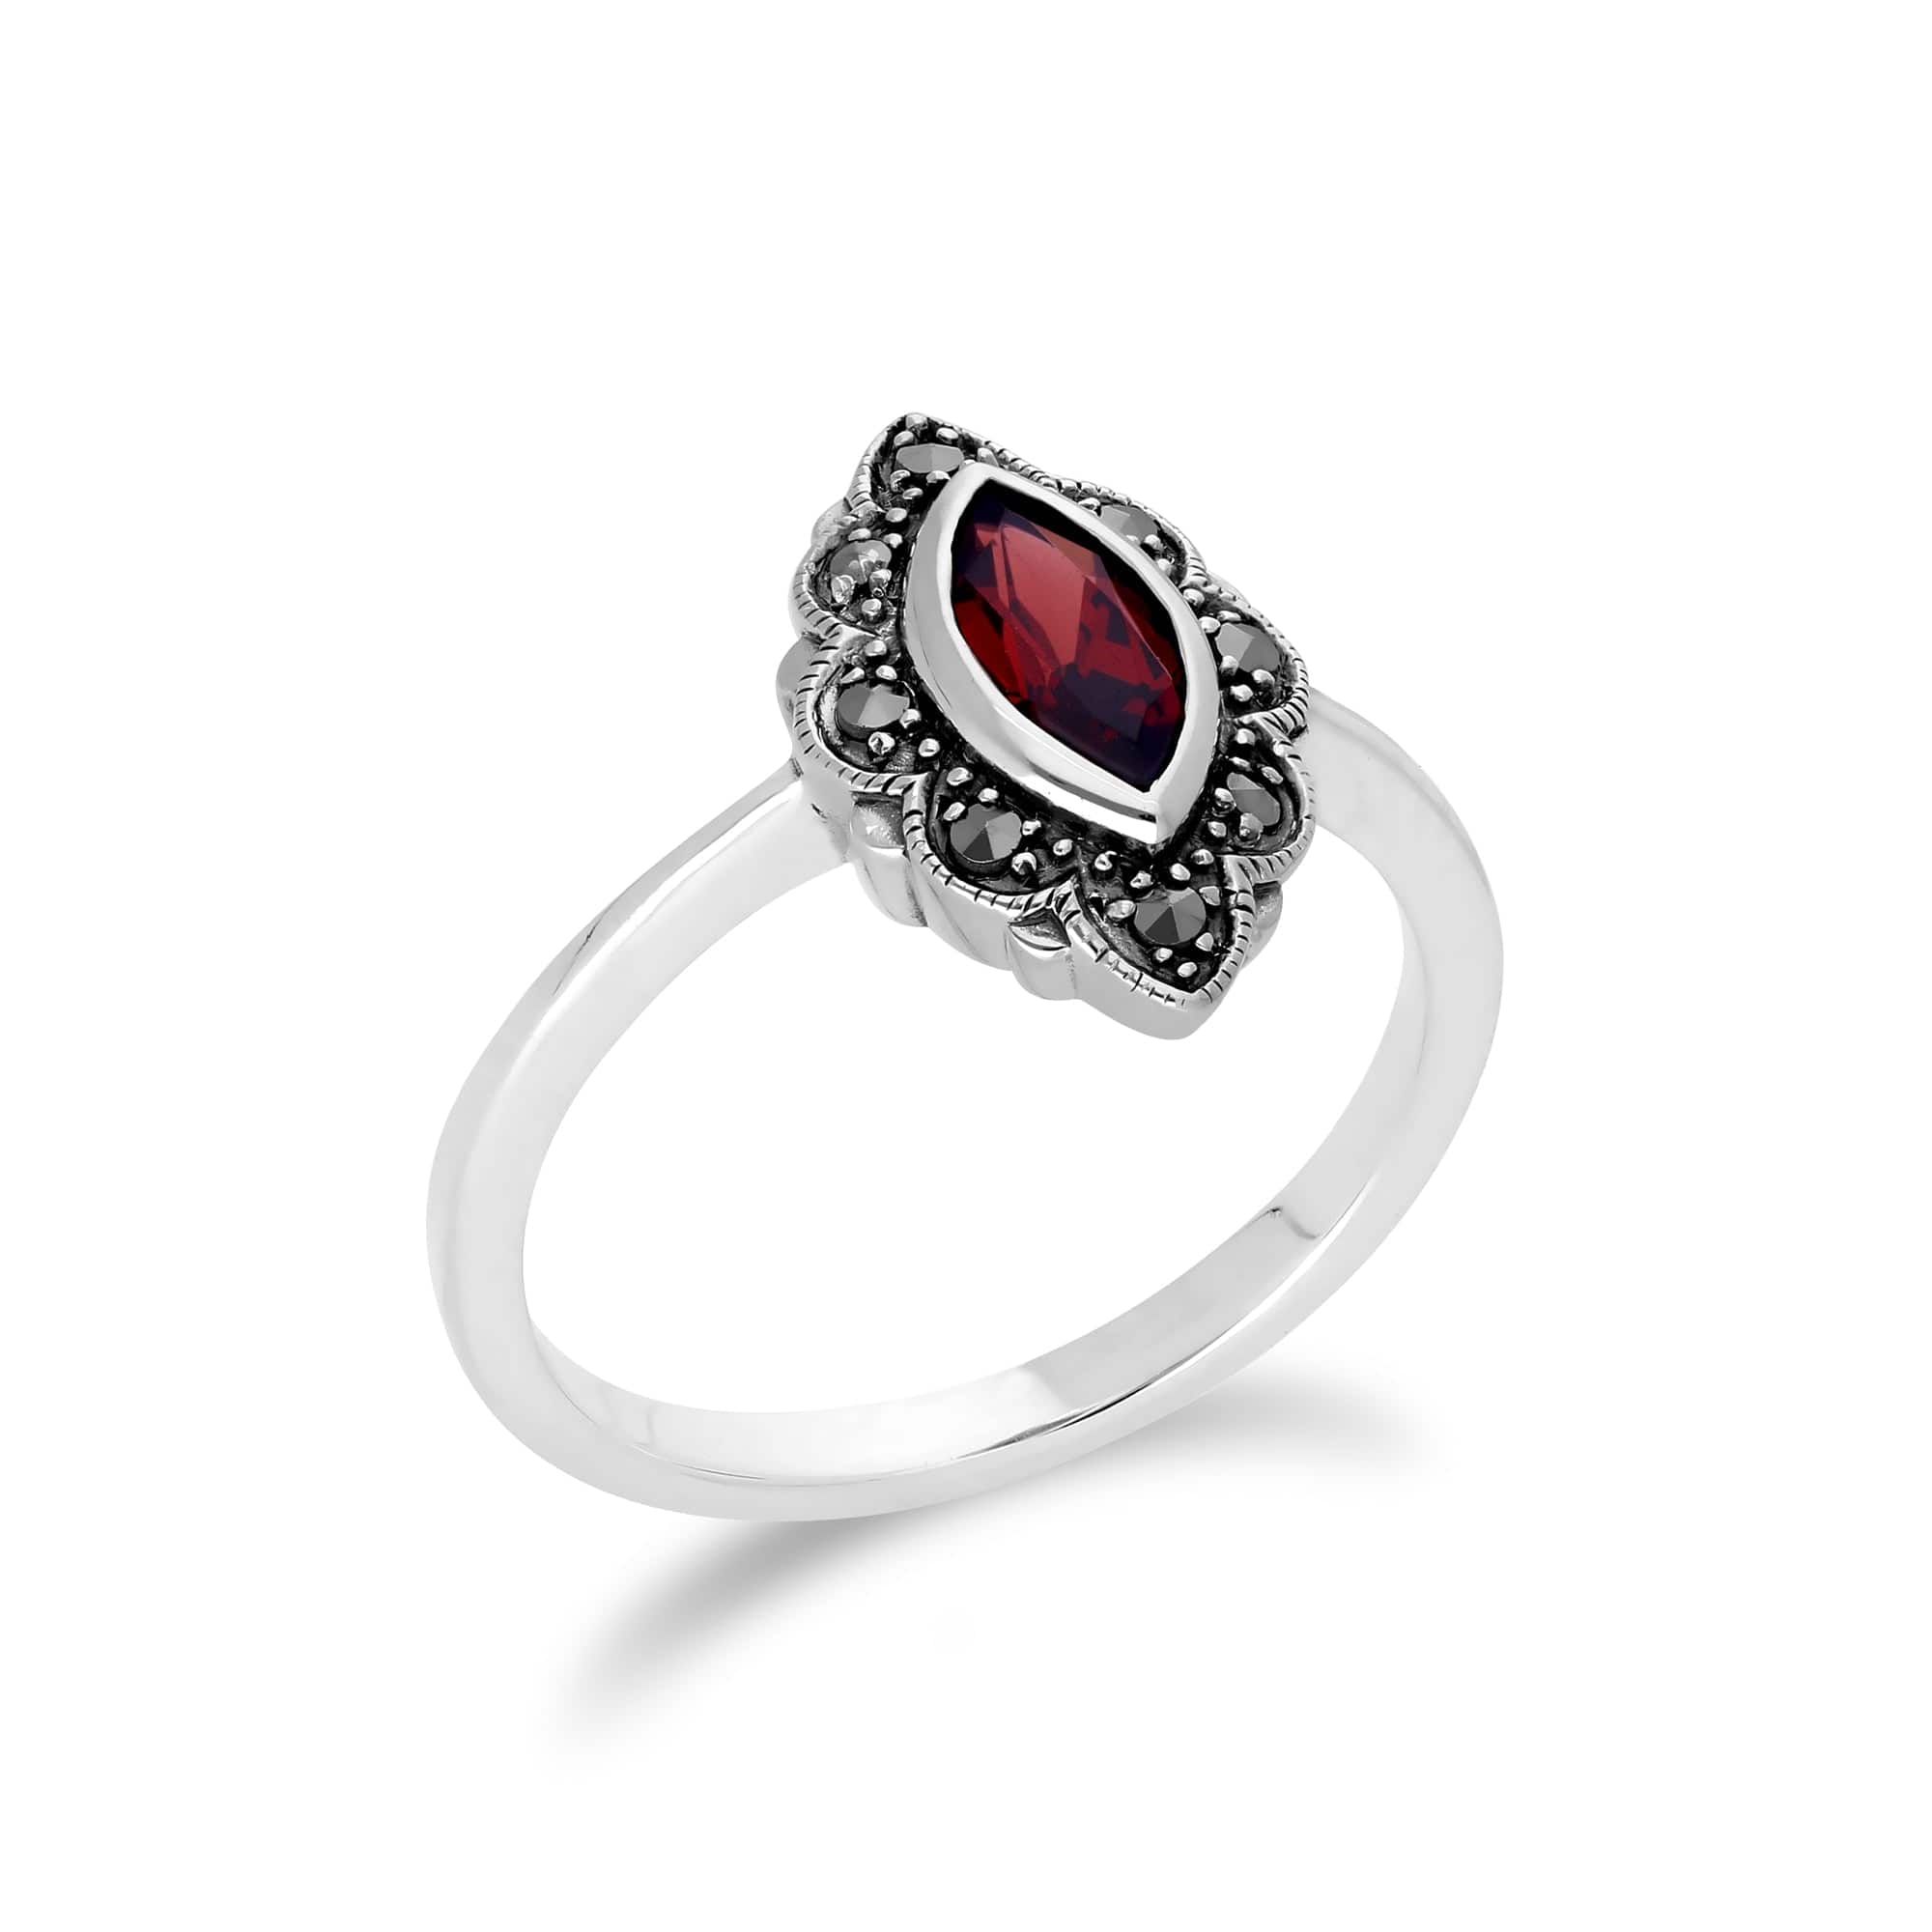 214R597205925 Art Nouveau Style Marquise Garnet & Marcasite Leaf Ring in 925 Sterling Silver 2